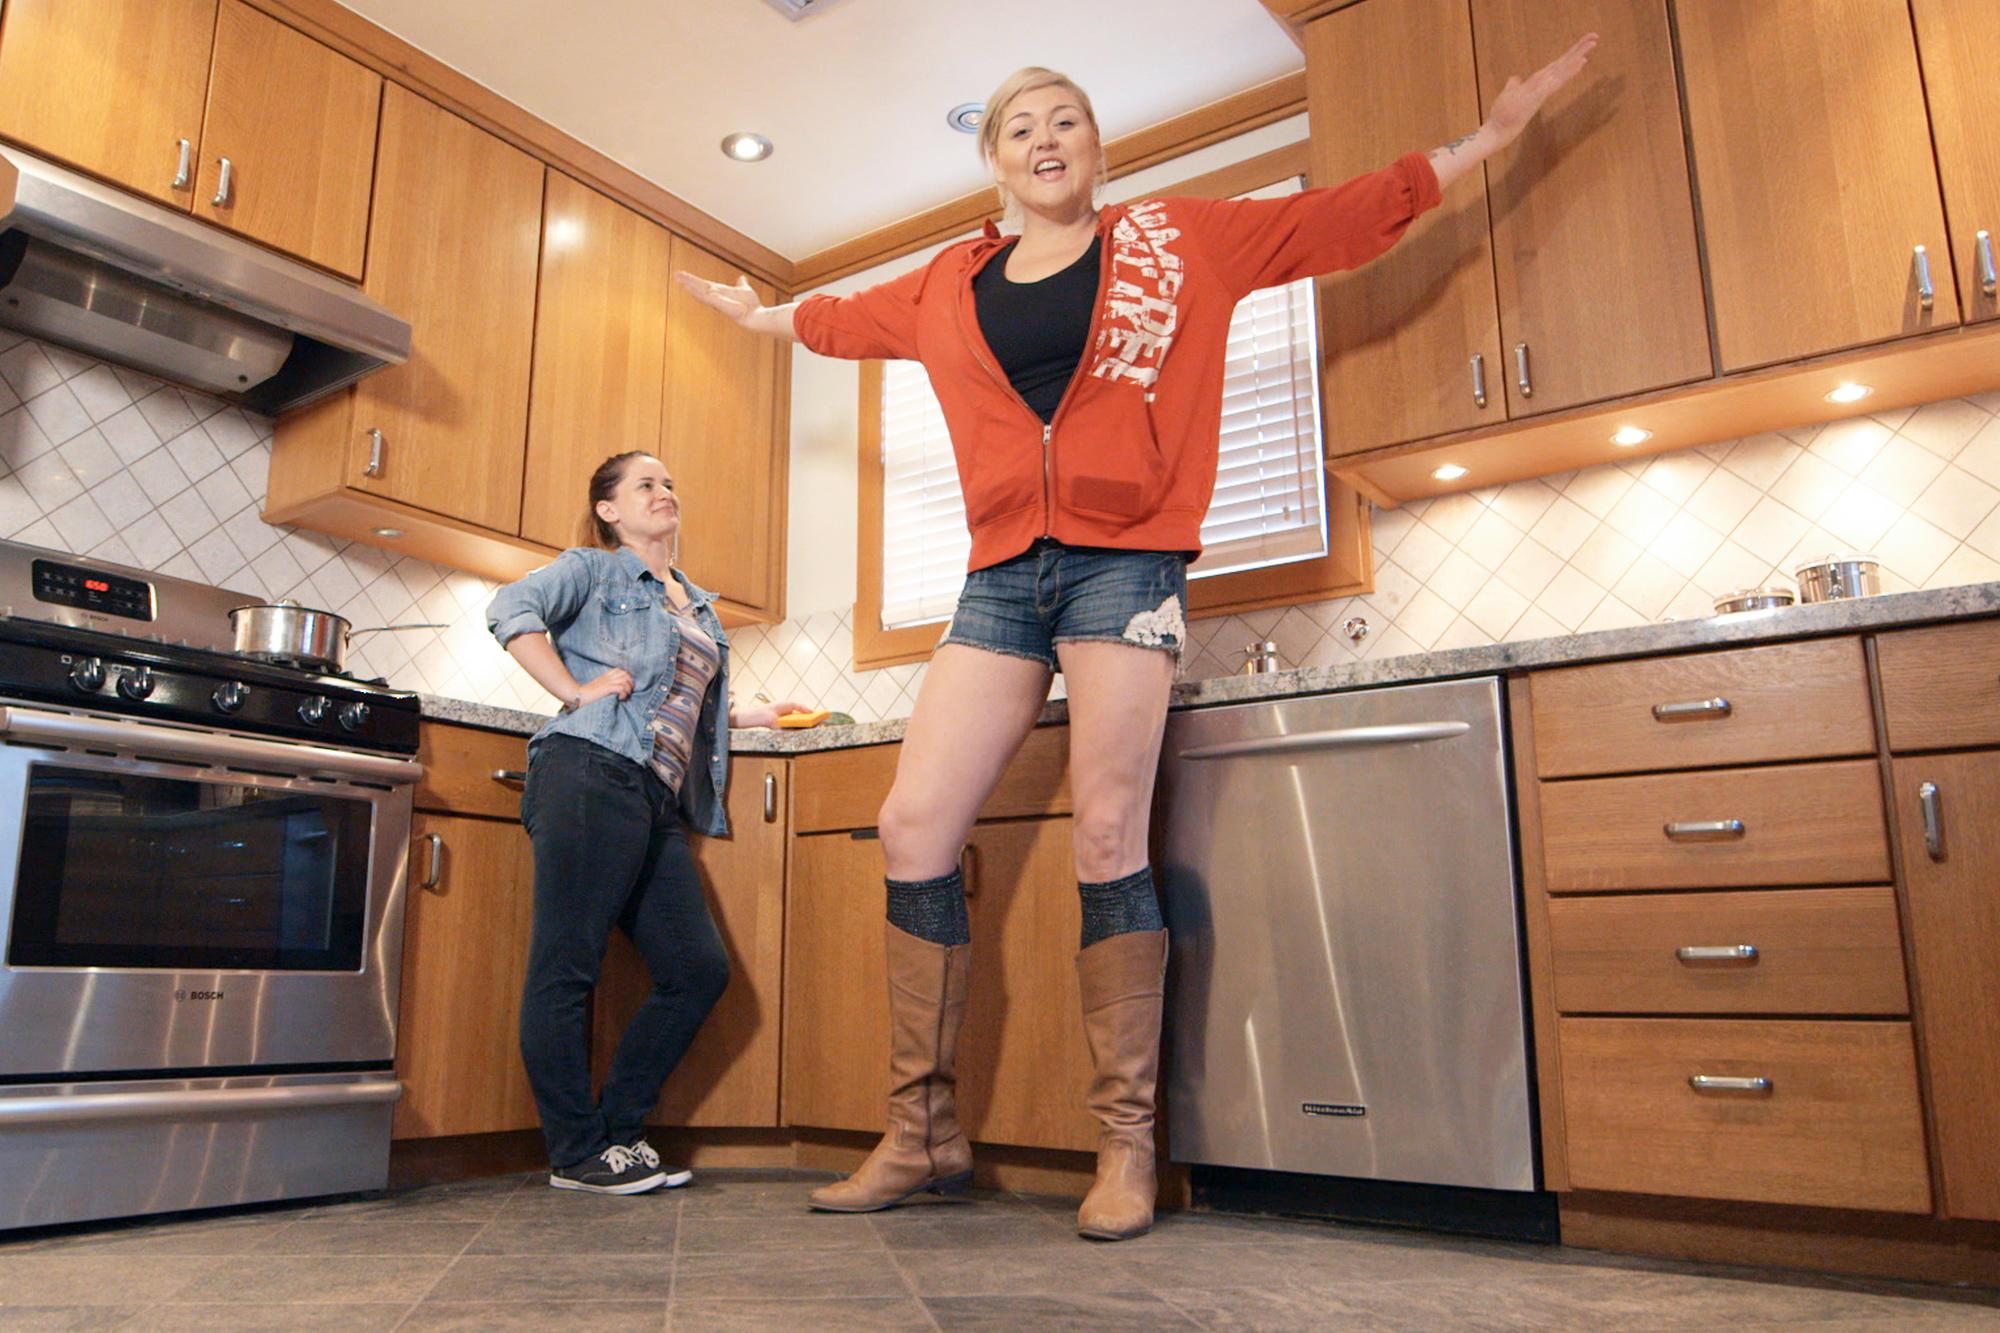 TLC's 'My Giant Life' Explores Issues Facing Extremely Tall Women